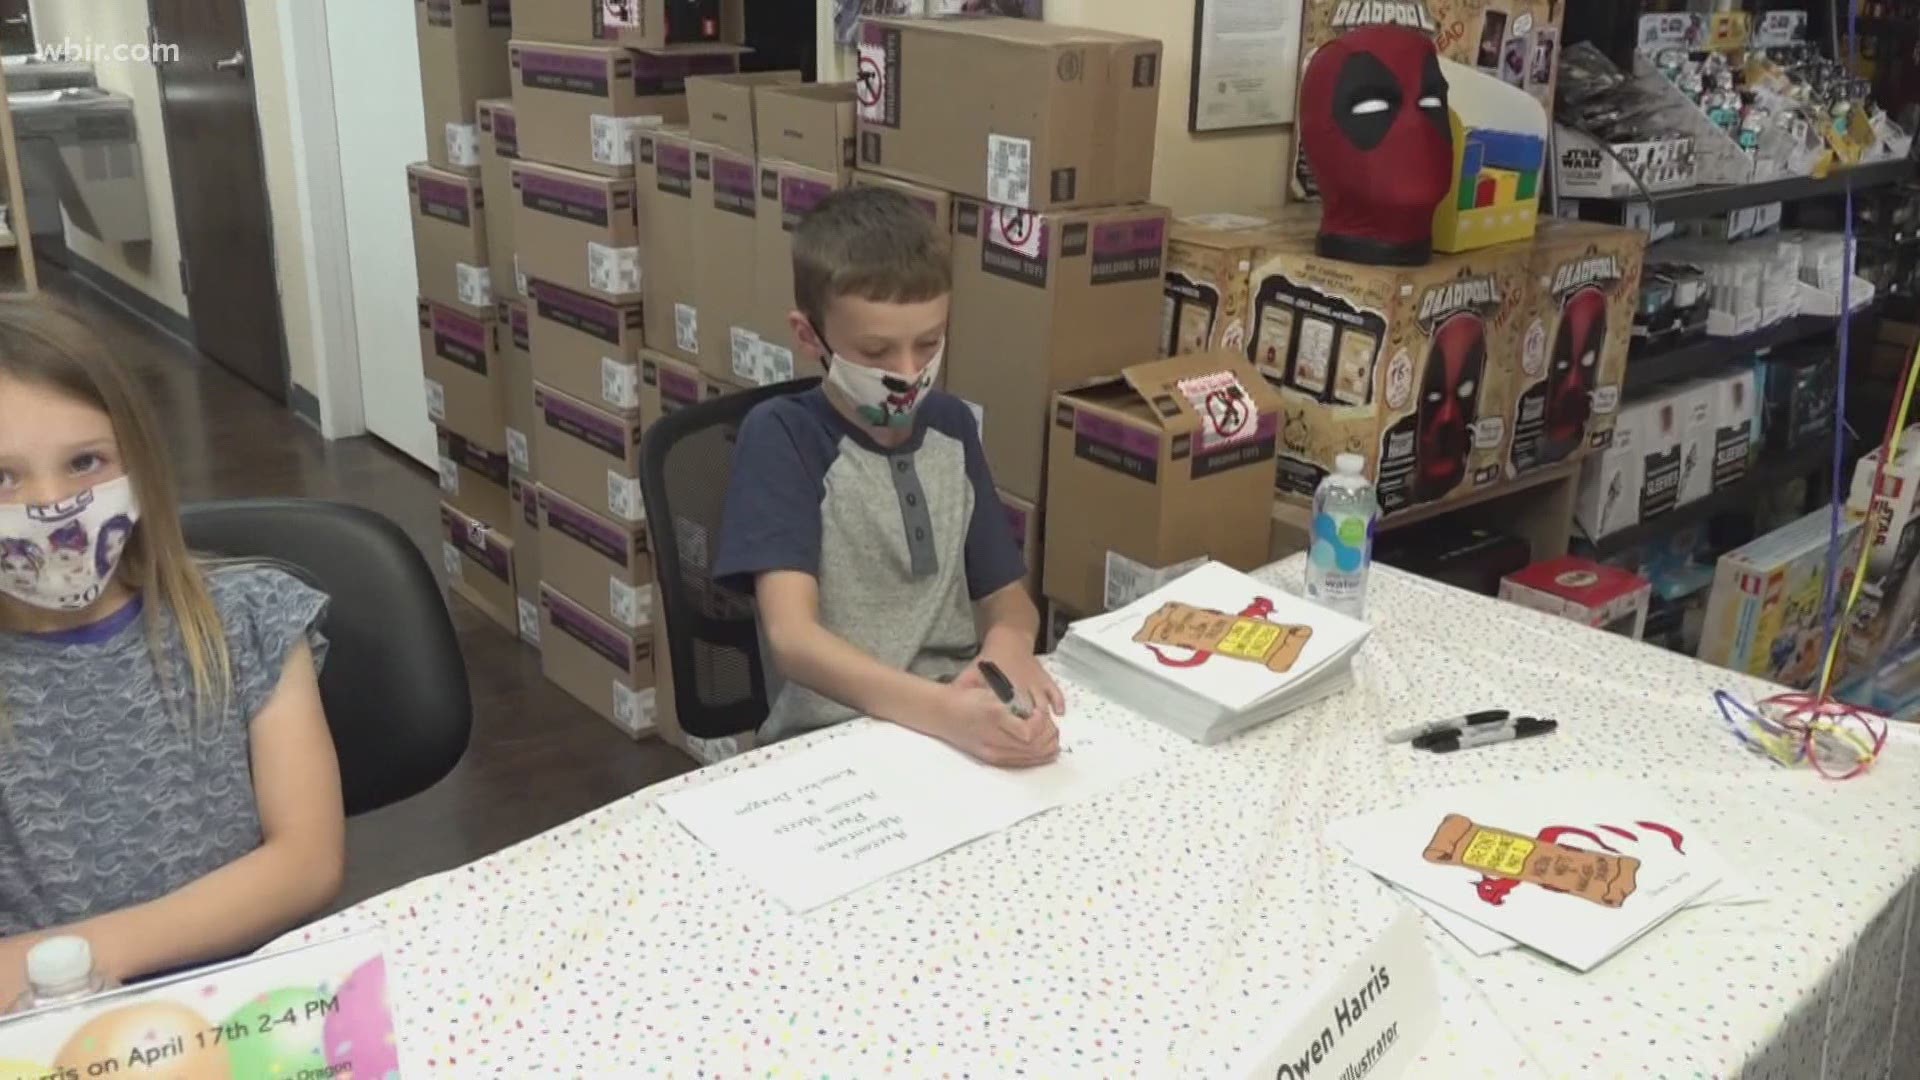 Owen Harris, 10, was at BrickHouse Collectibles to meet some of his fans and sign copies of his book, "Axeton's Adventures Part I: Axeton Meets a Knucker Dragon."